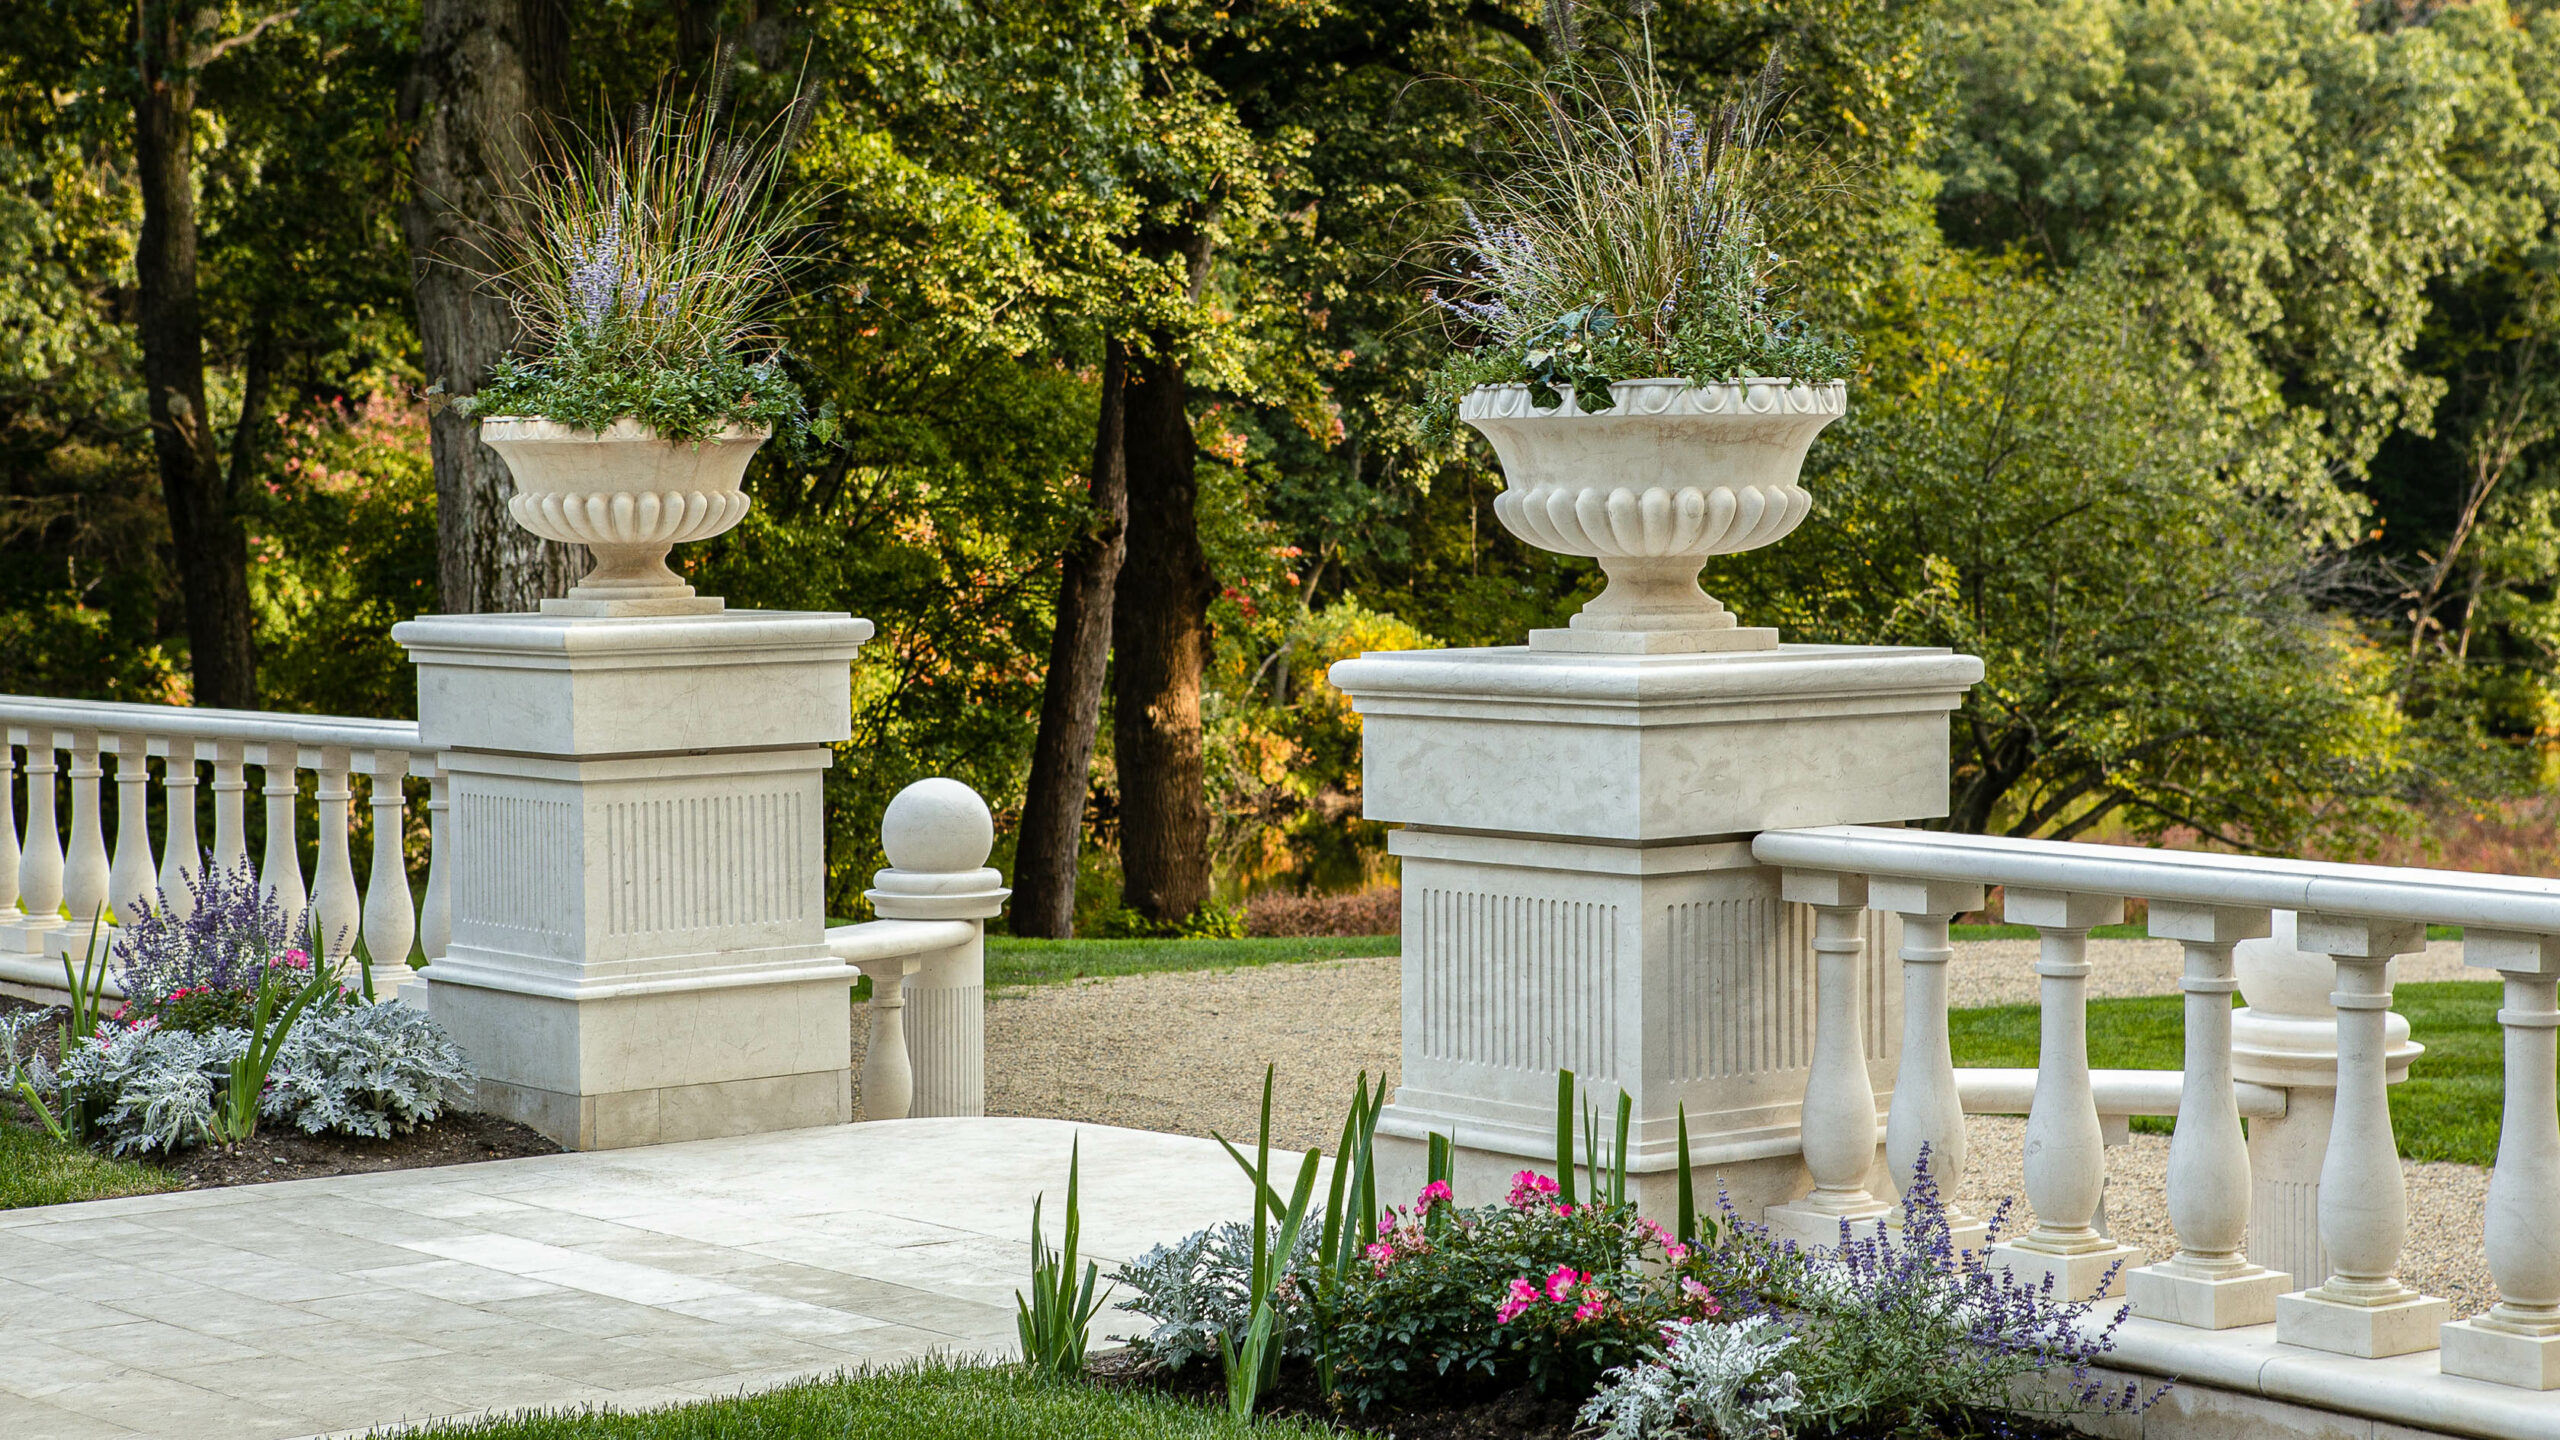 Close up of marble columns with planters on top.